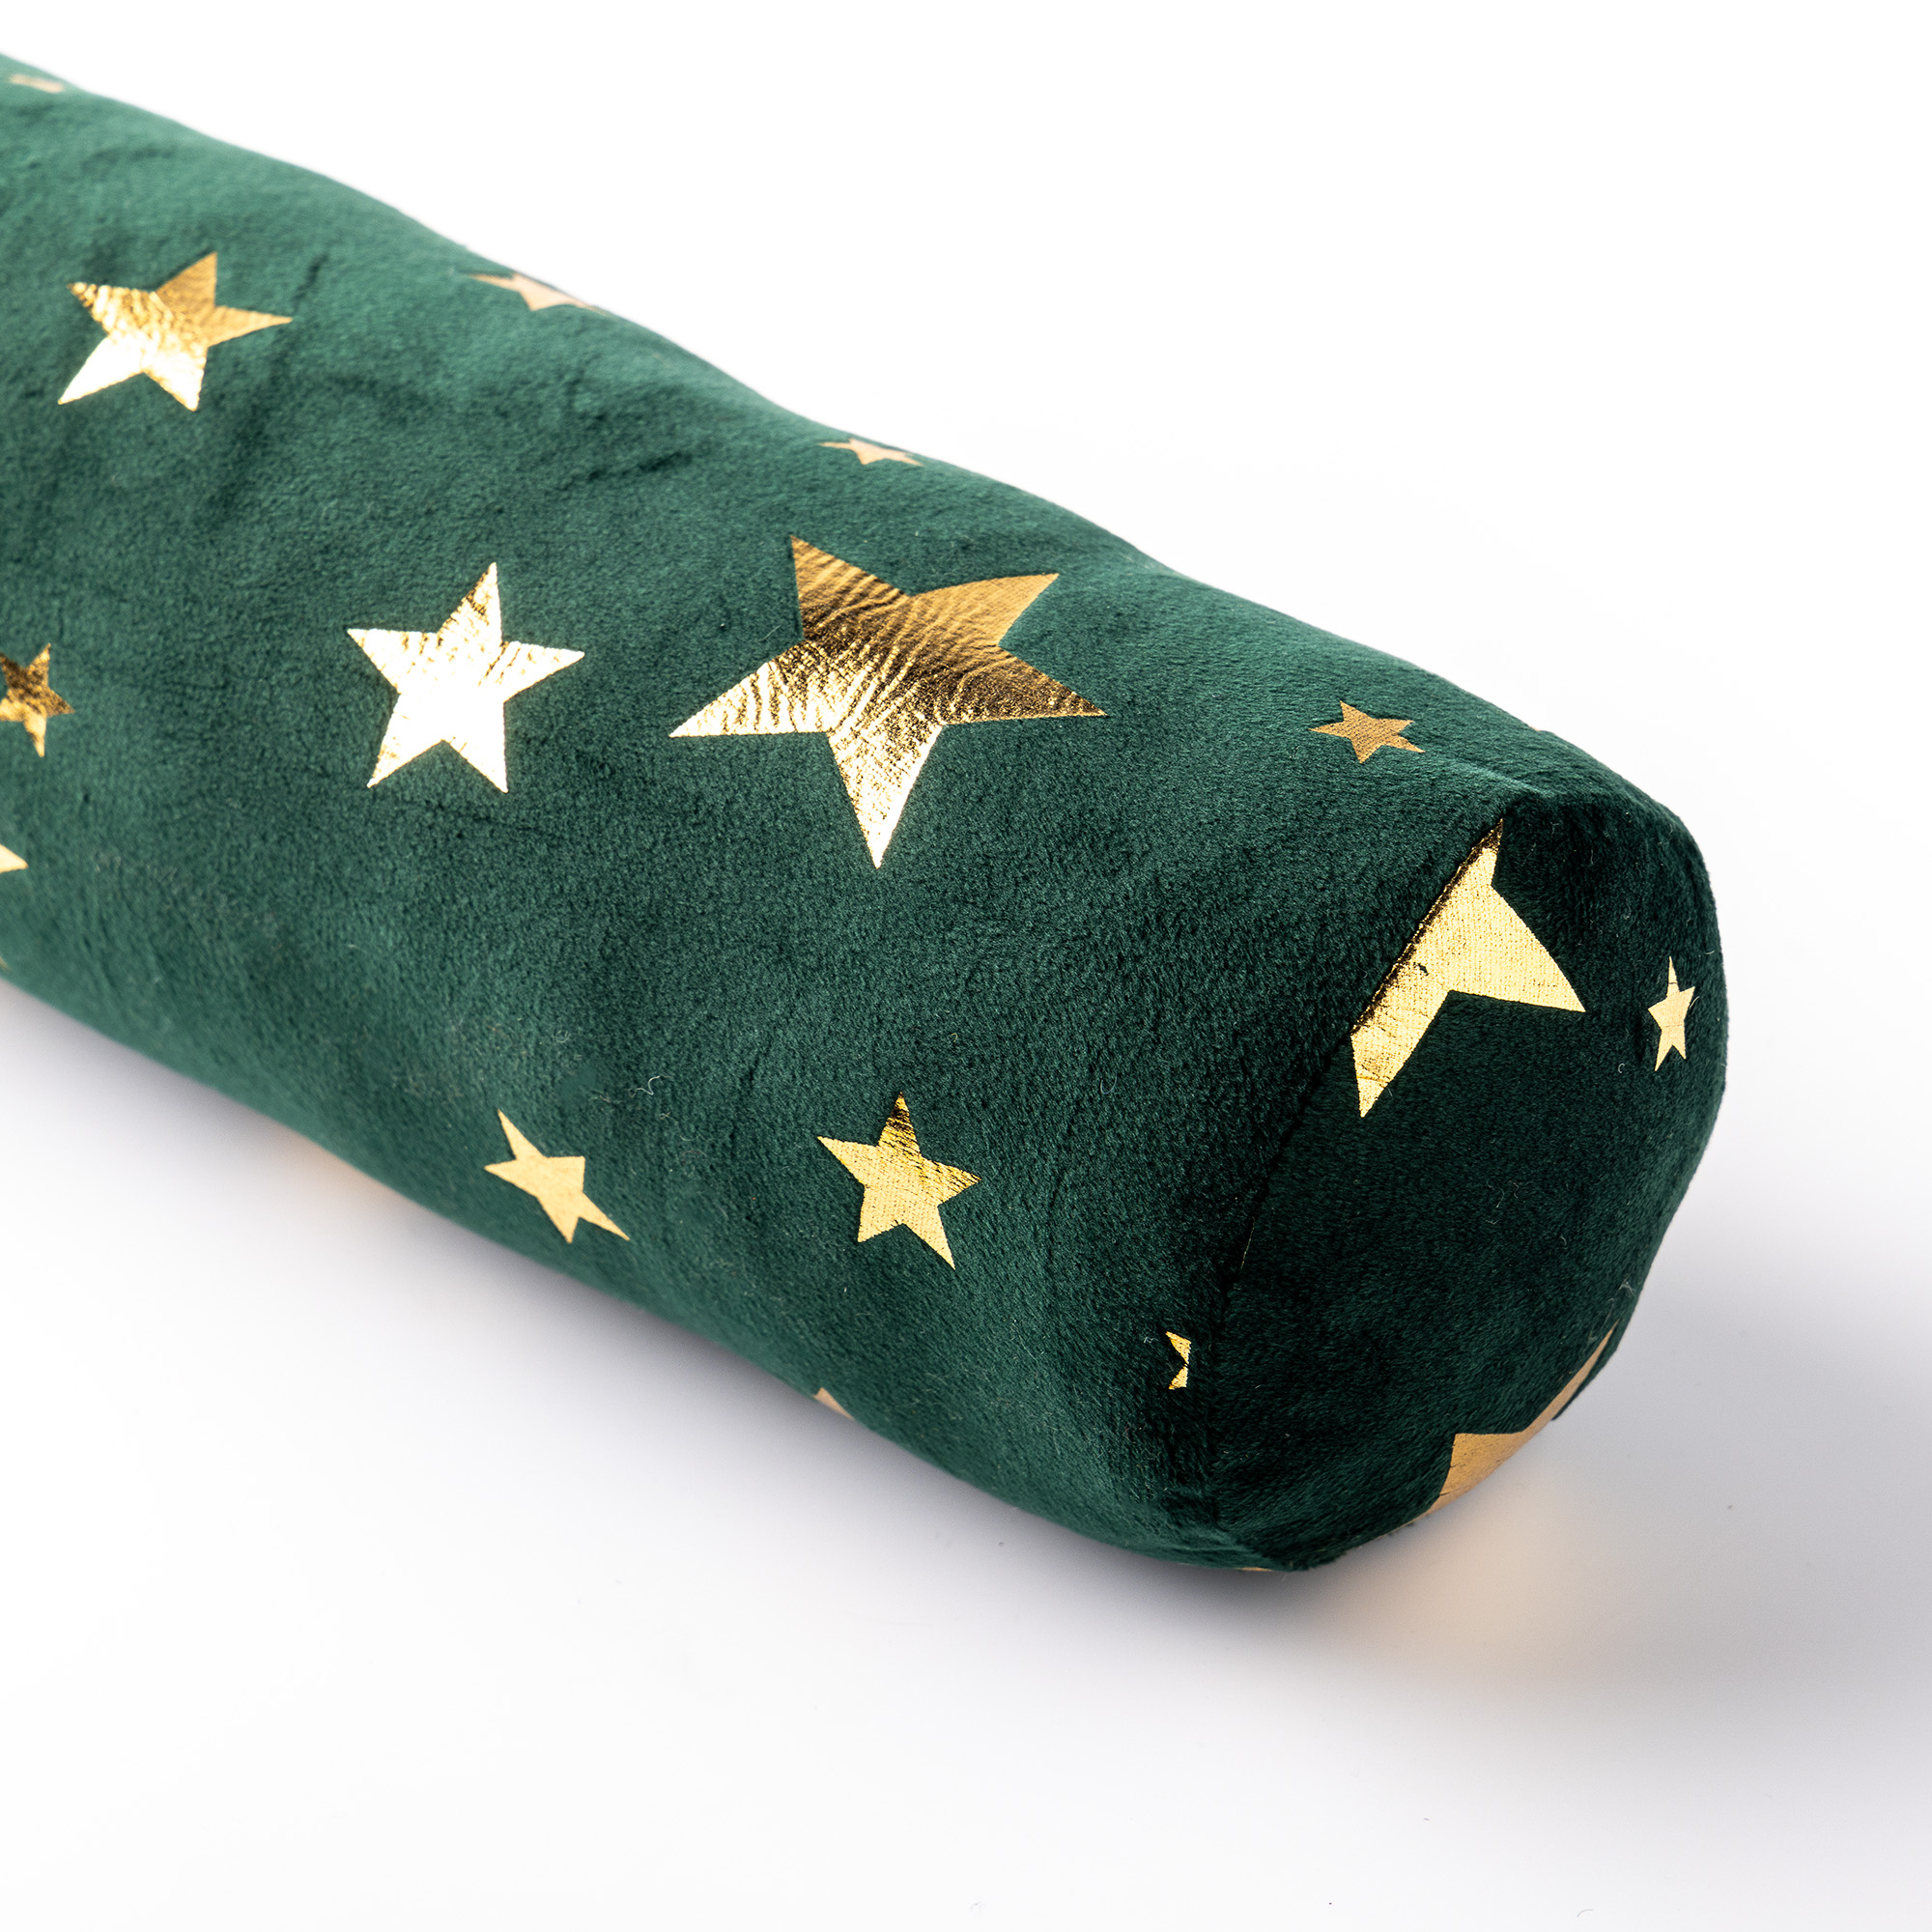 STARS - Draught excluder 90x10 cm - Door draught excluder with stars - Mountain View - green